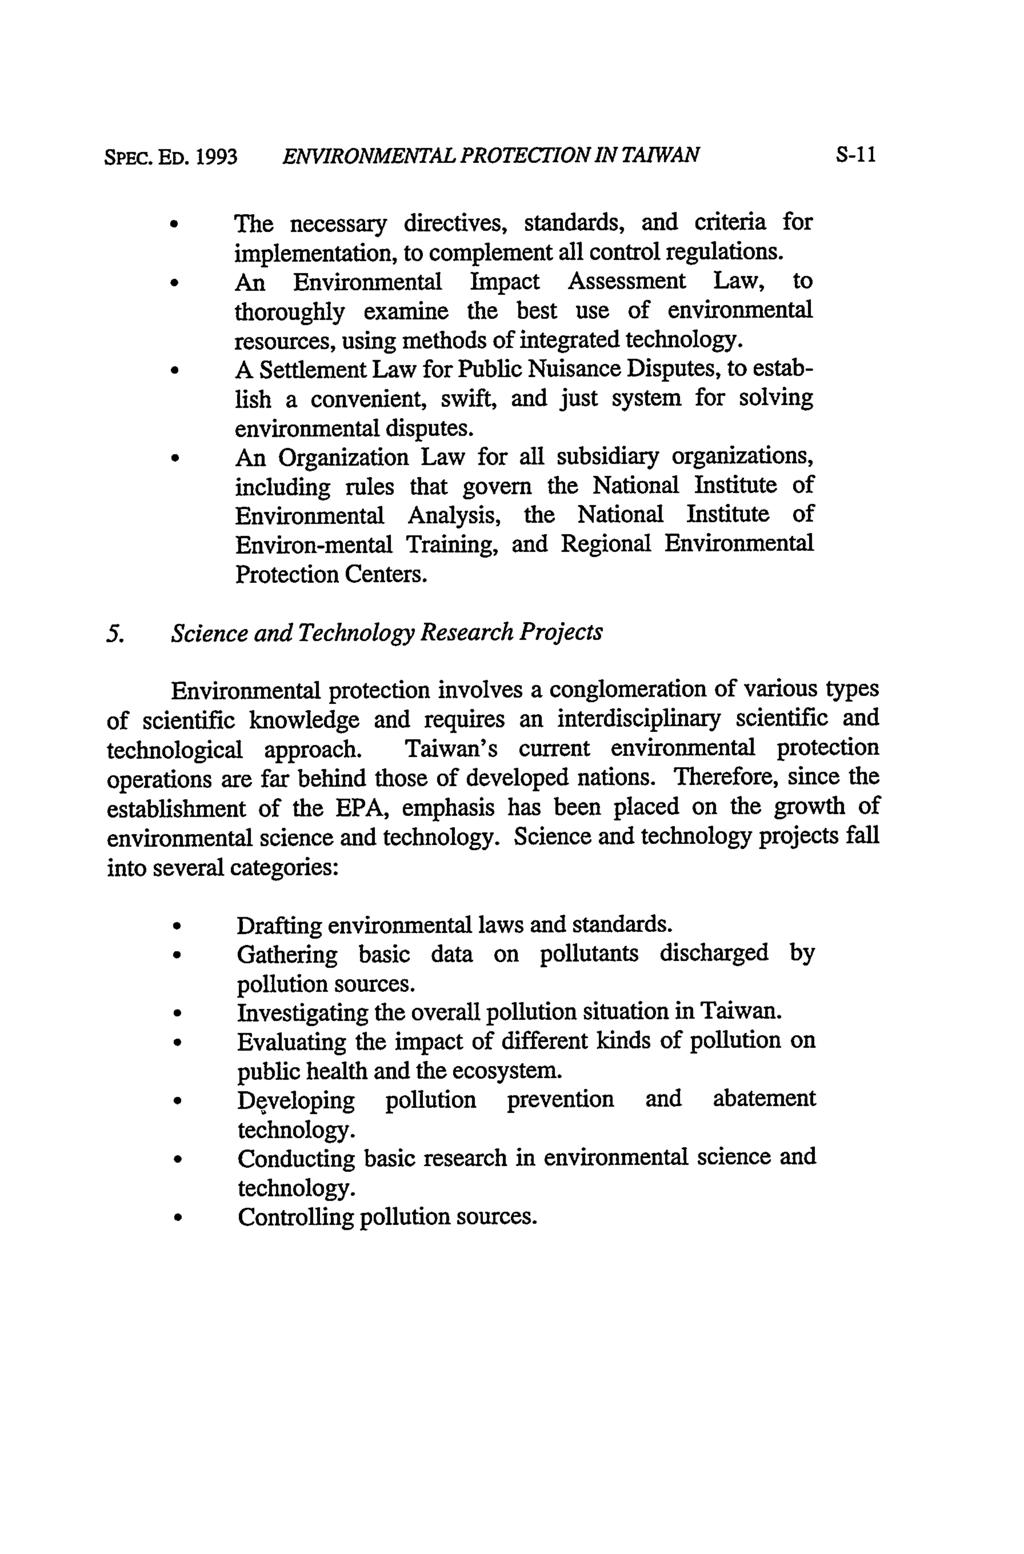 SPEC. ED. 1993 ENVIRONMENTAL PROTEC7ION IN TAIWAN " The necessary directives, standards, and criteria for implementation, to complement all control regulations.